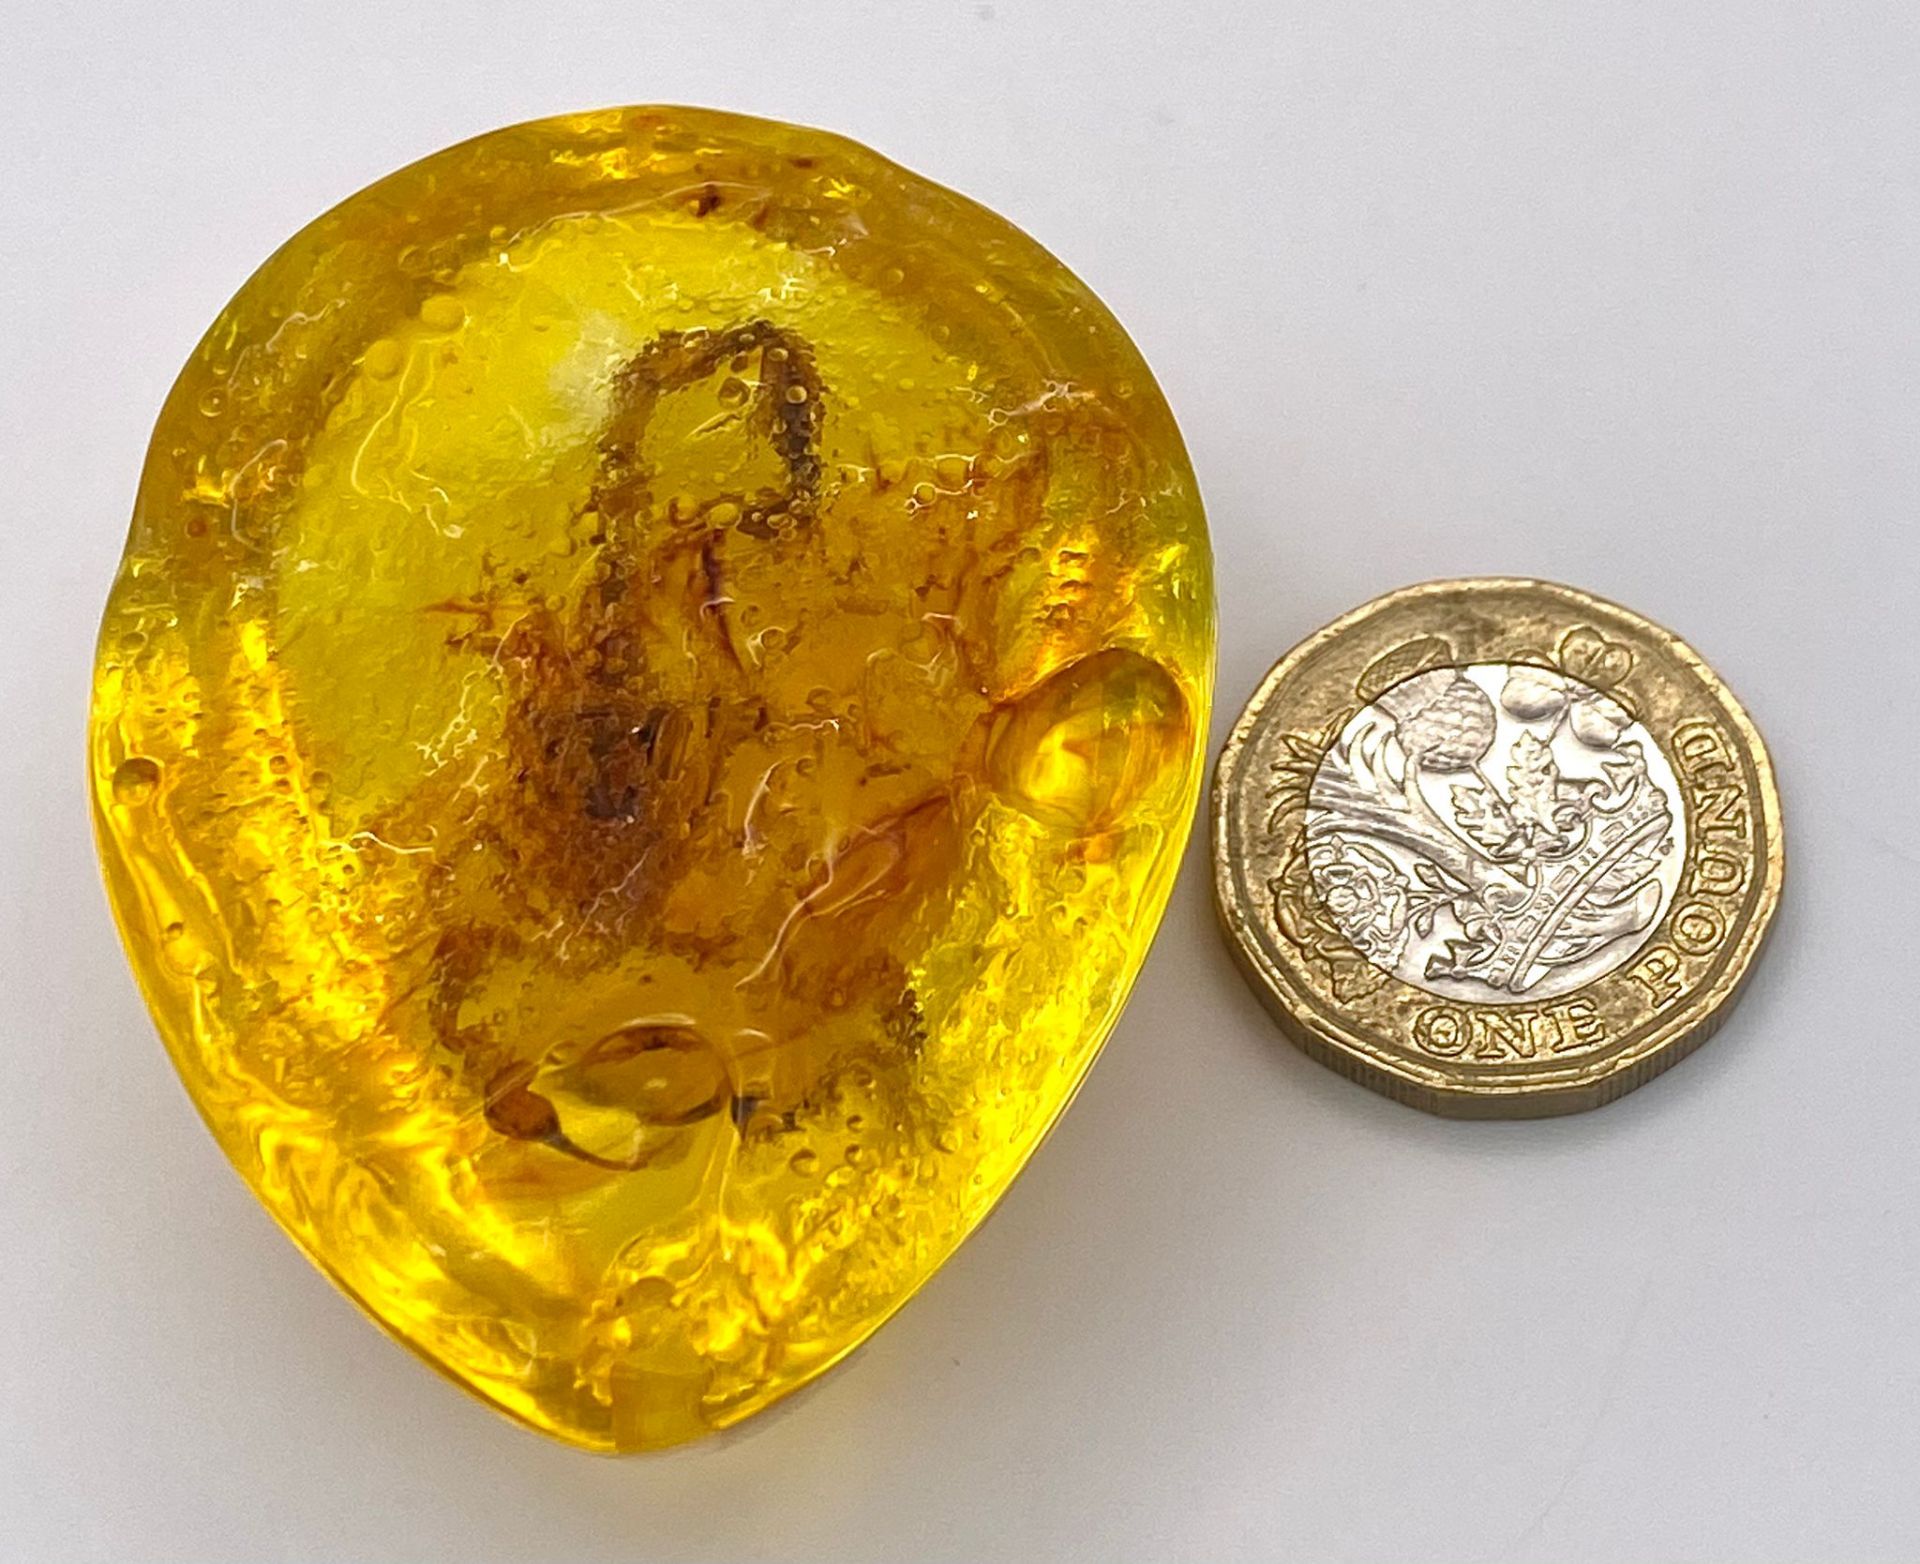 A Terrifying Scorpion Trapped in Amber Resin -Pendant/Paperweight. 6cm - Image 3 of 3